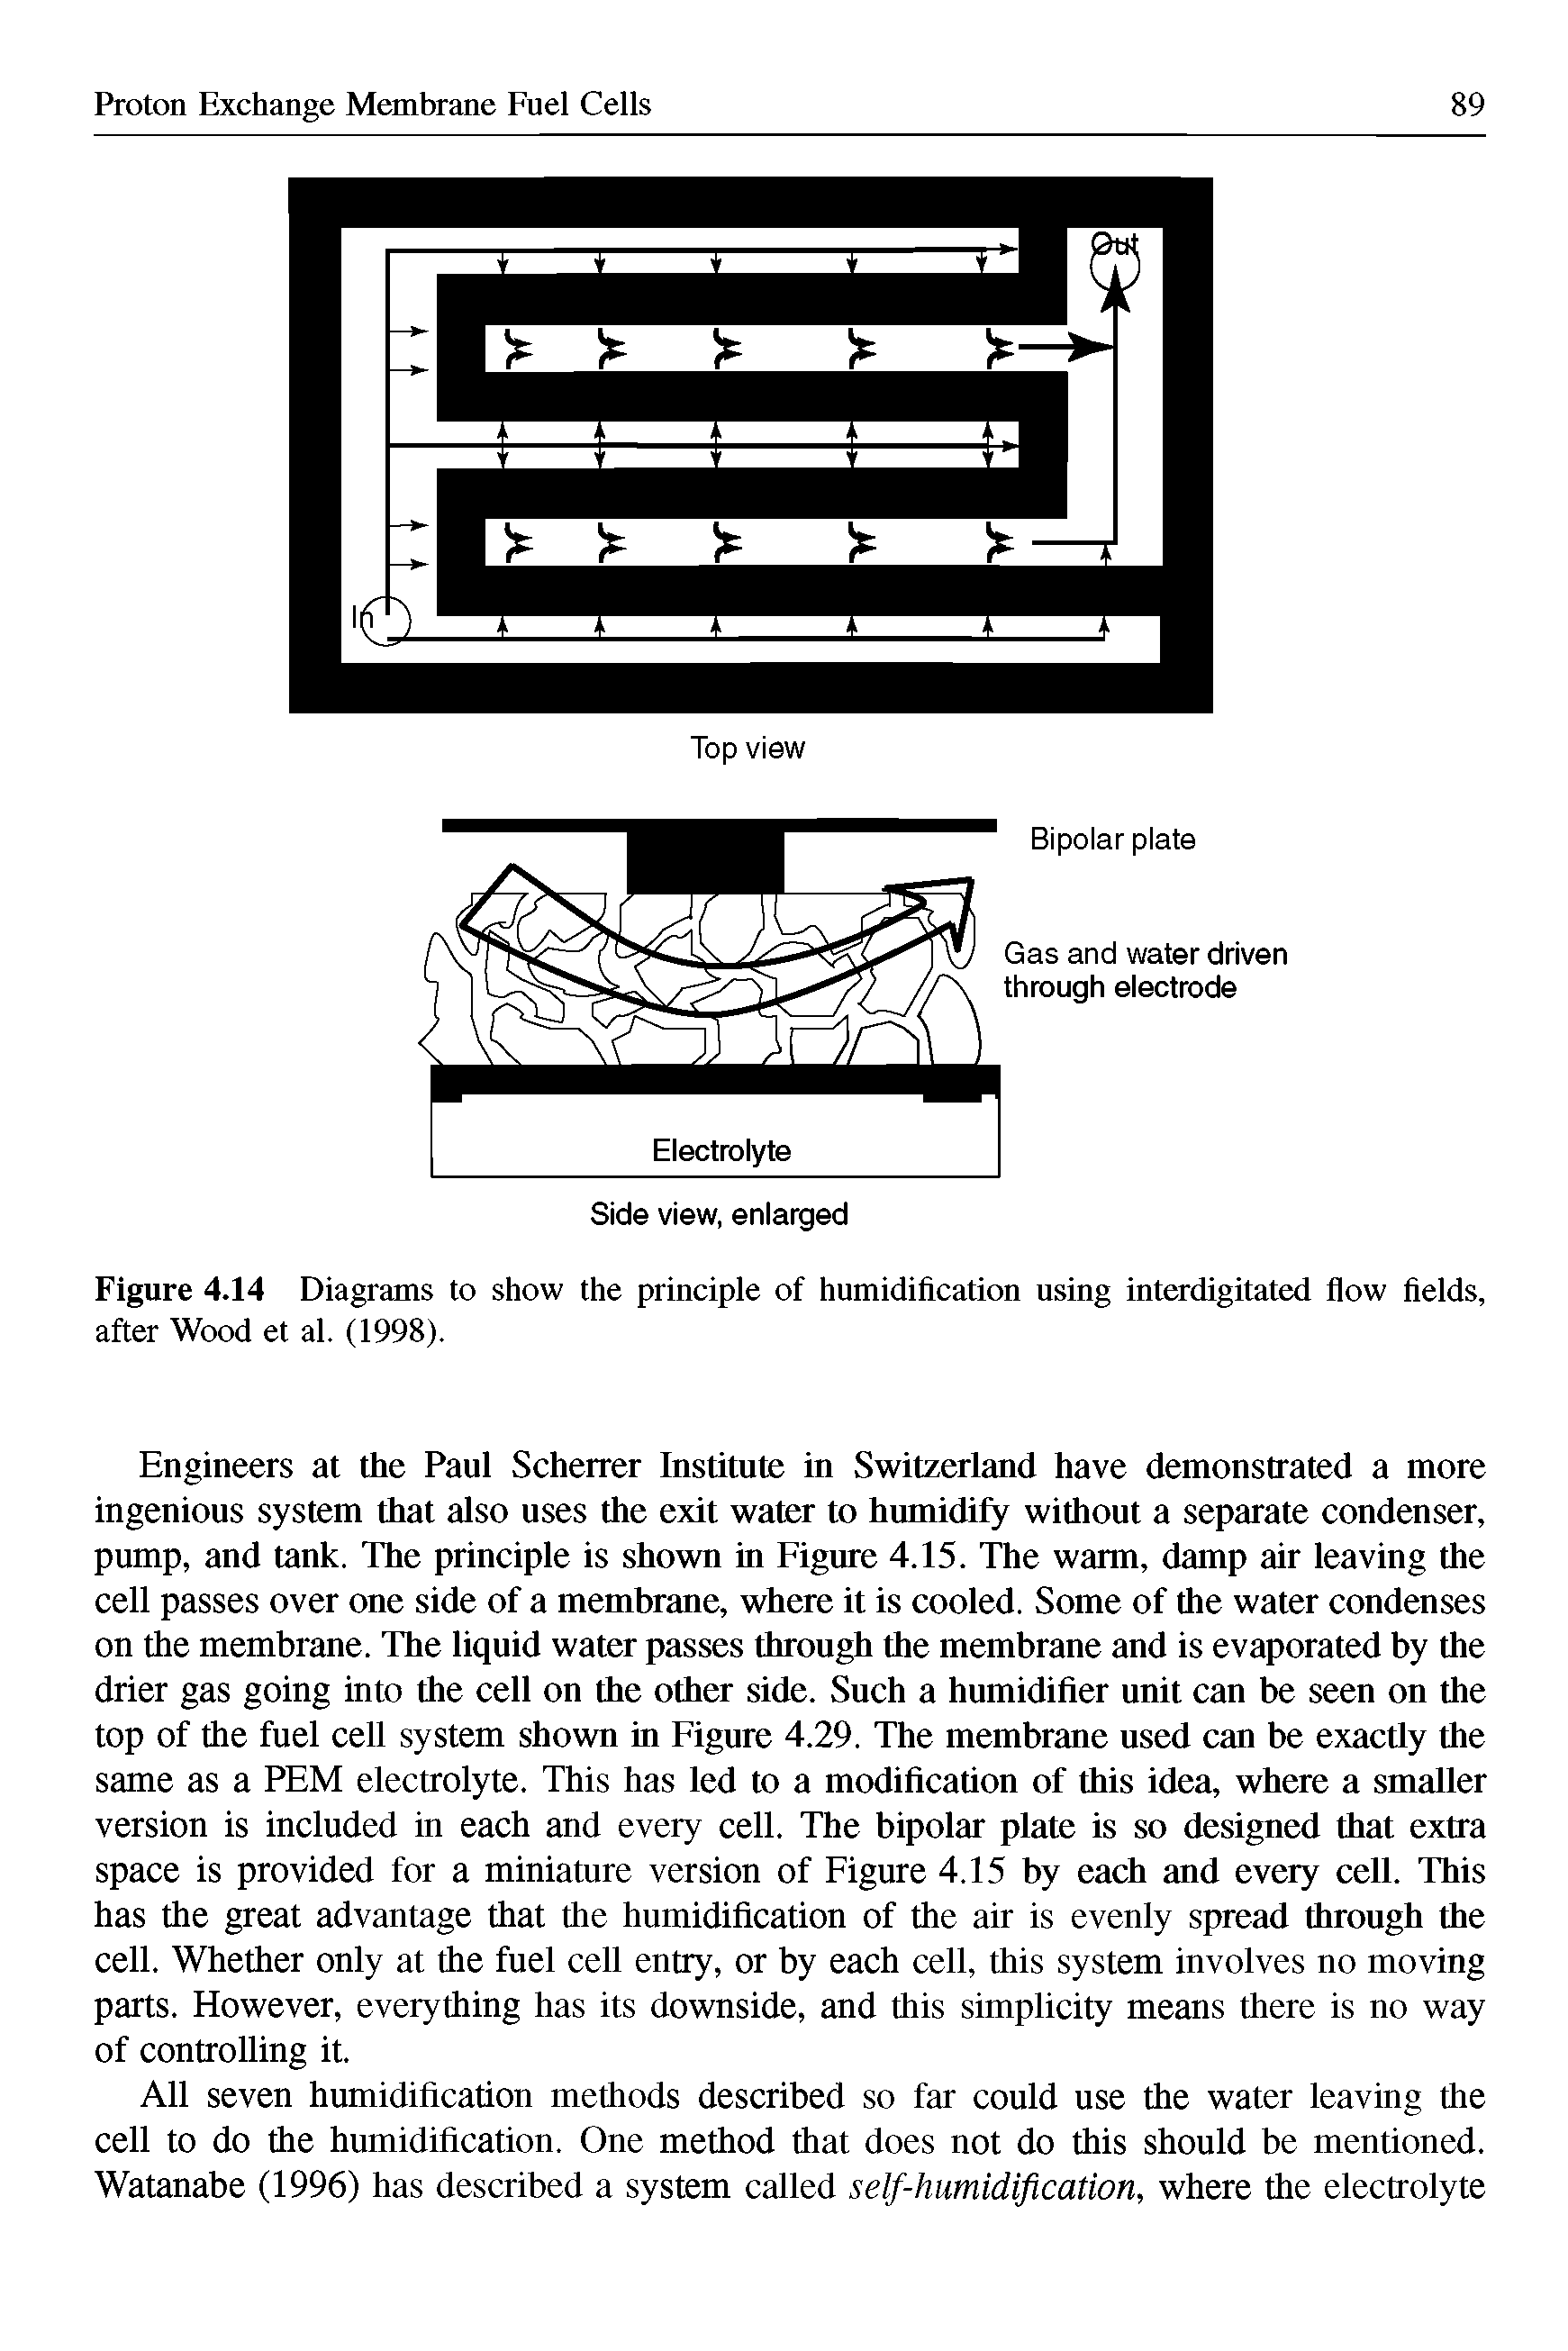 Figure 4.14 Diagrams to show the principle of humidification using interdigitated flow fields, after Wood et al. (1998).